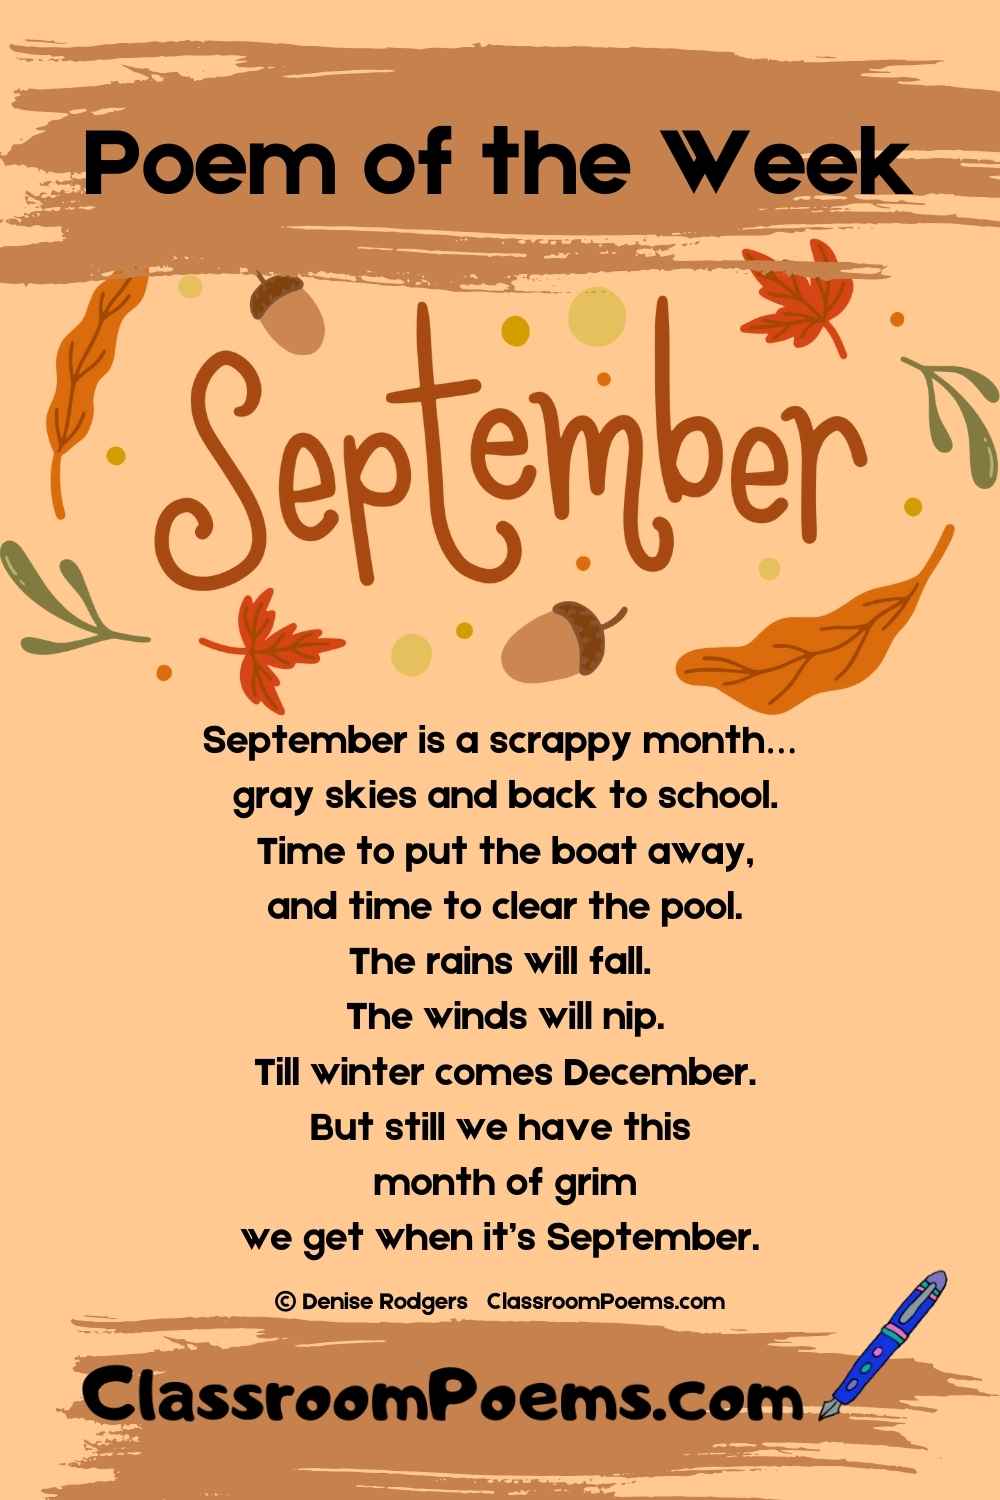 September poem of the week by Denise Rodgers on ClassroomPoems.com.